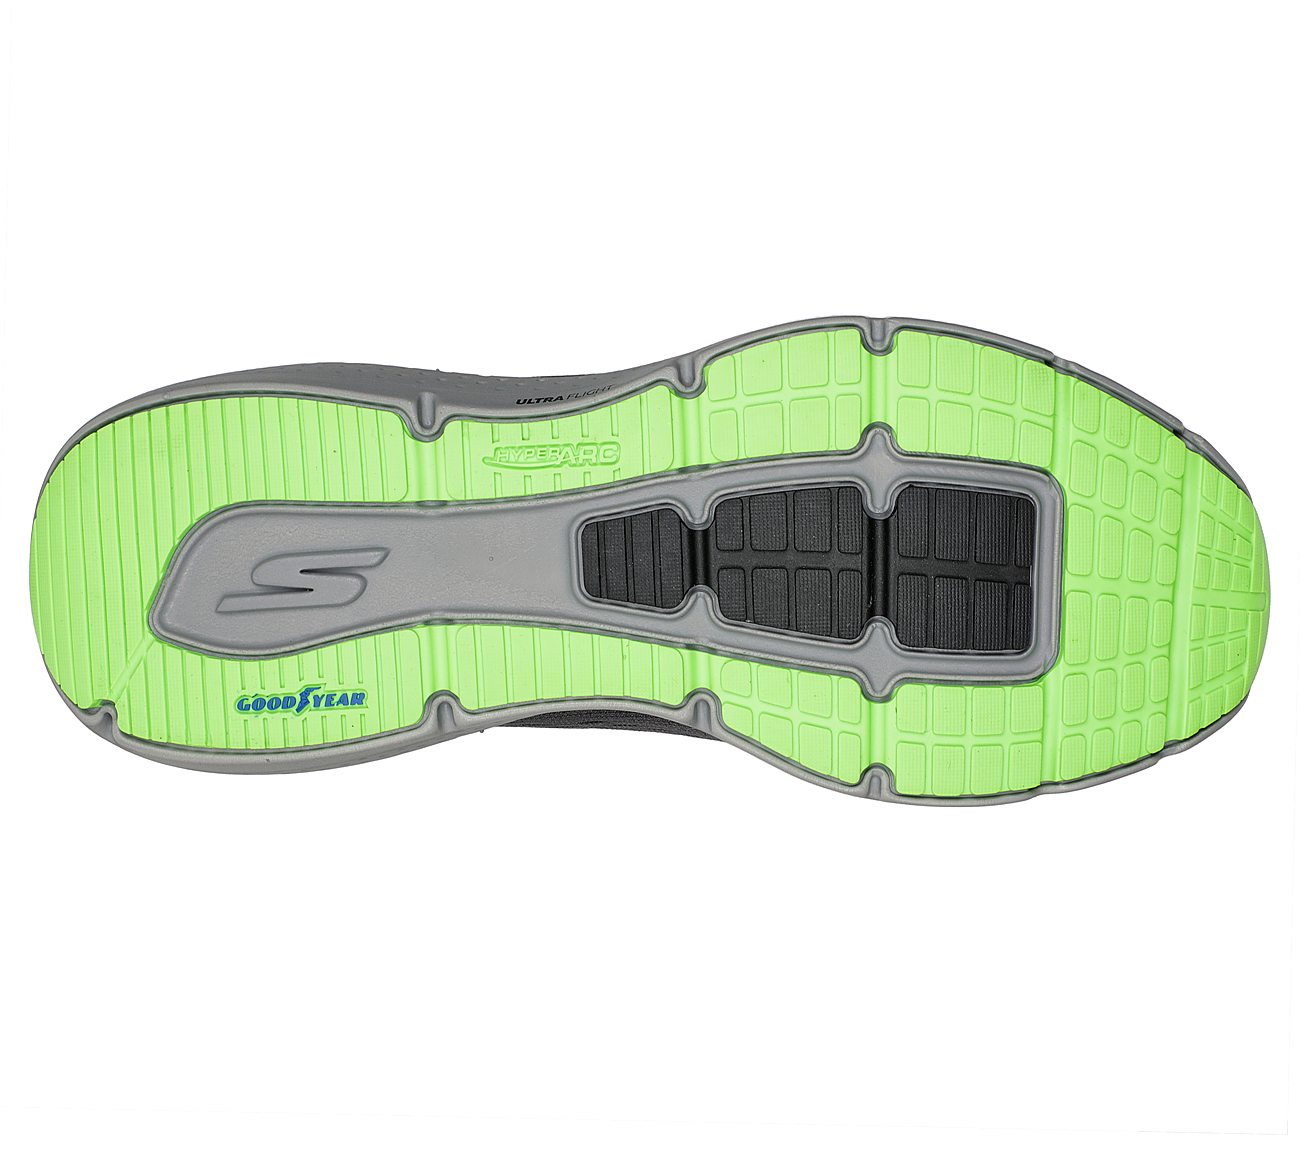 GO RUN PURE 3, CHARCOAL/LIME Footwear Bottom View